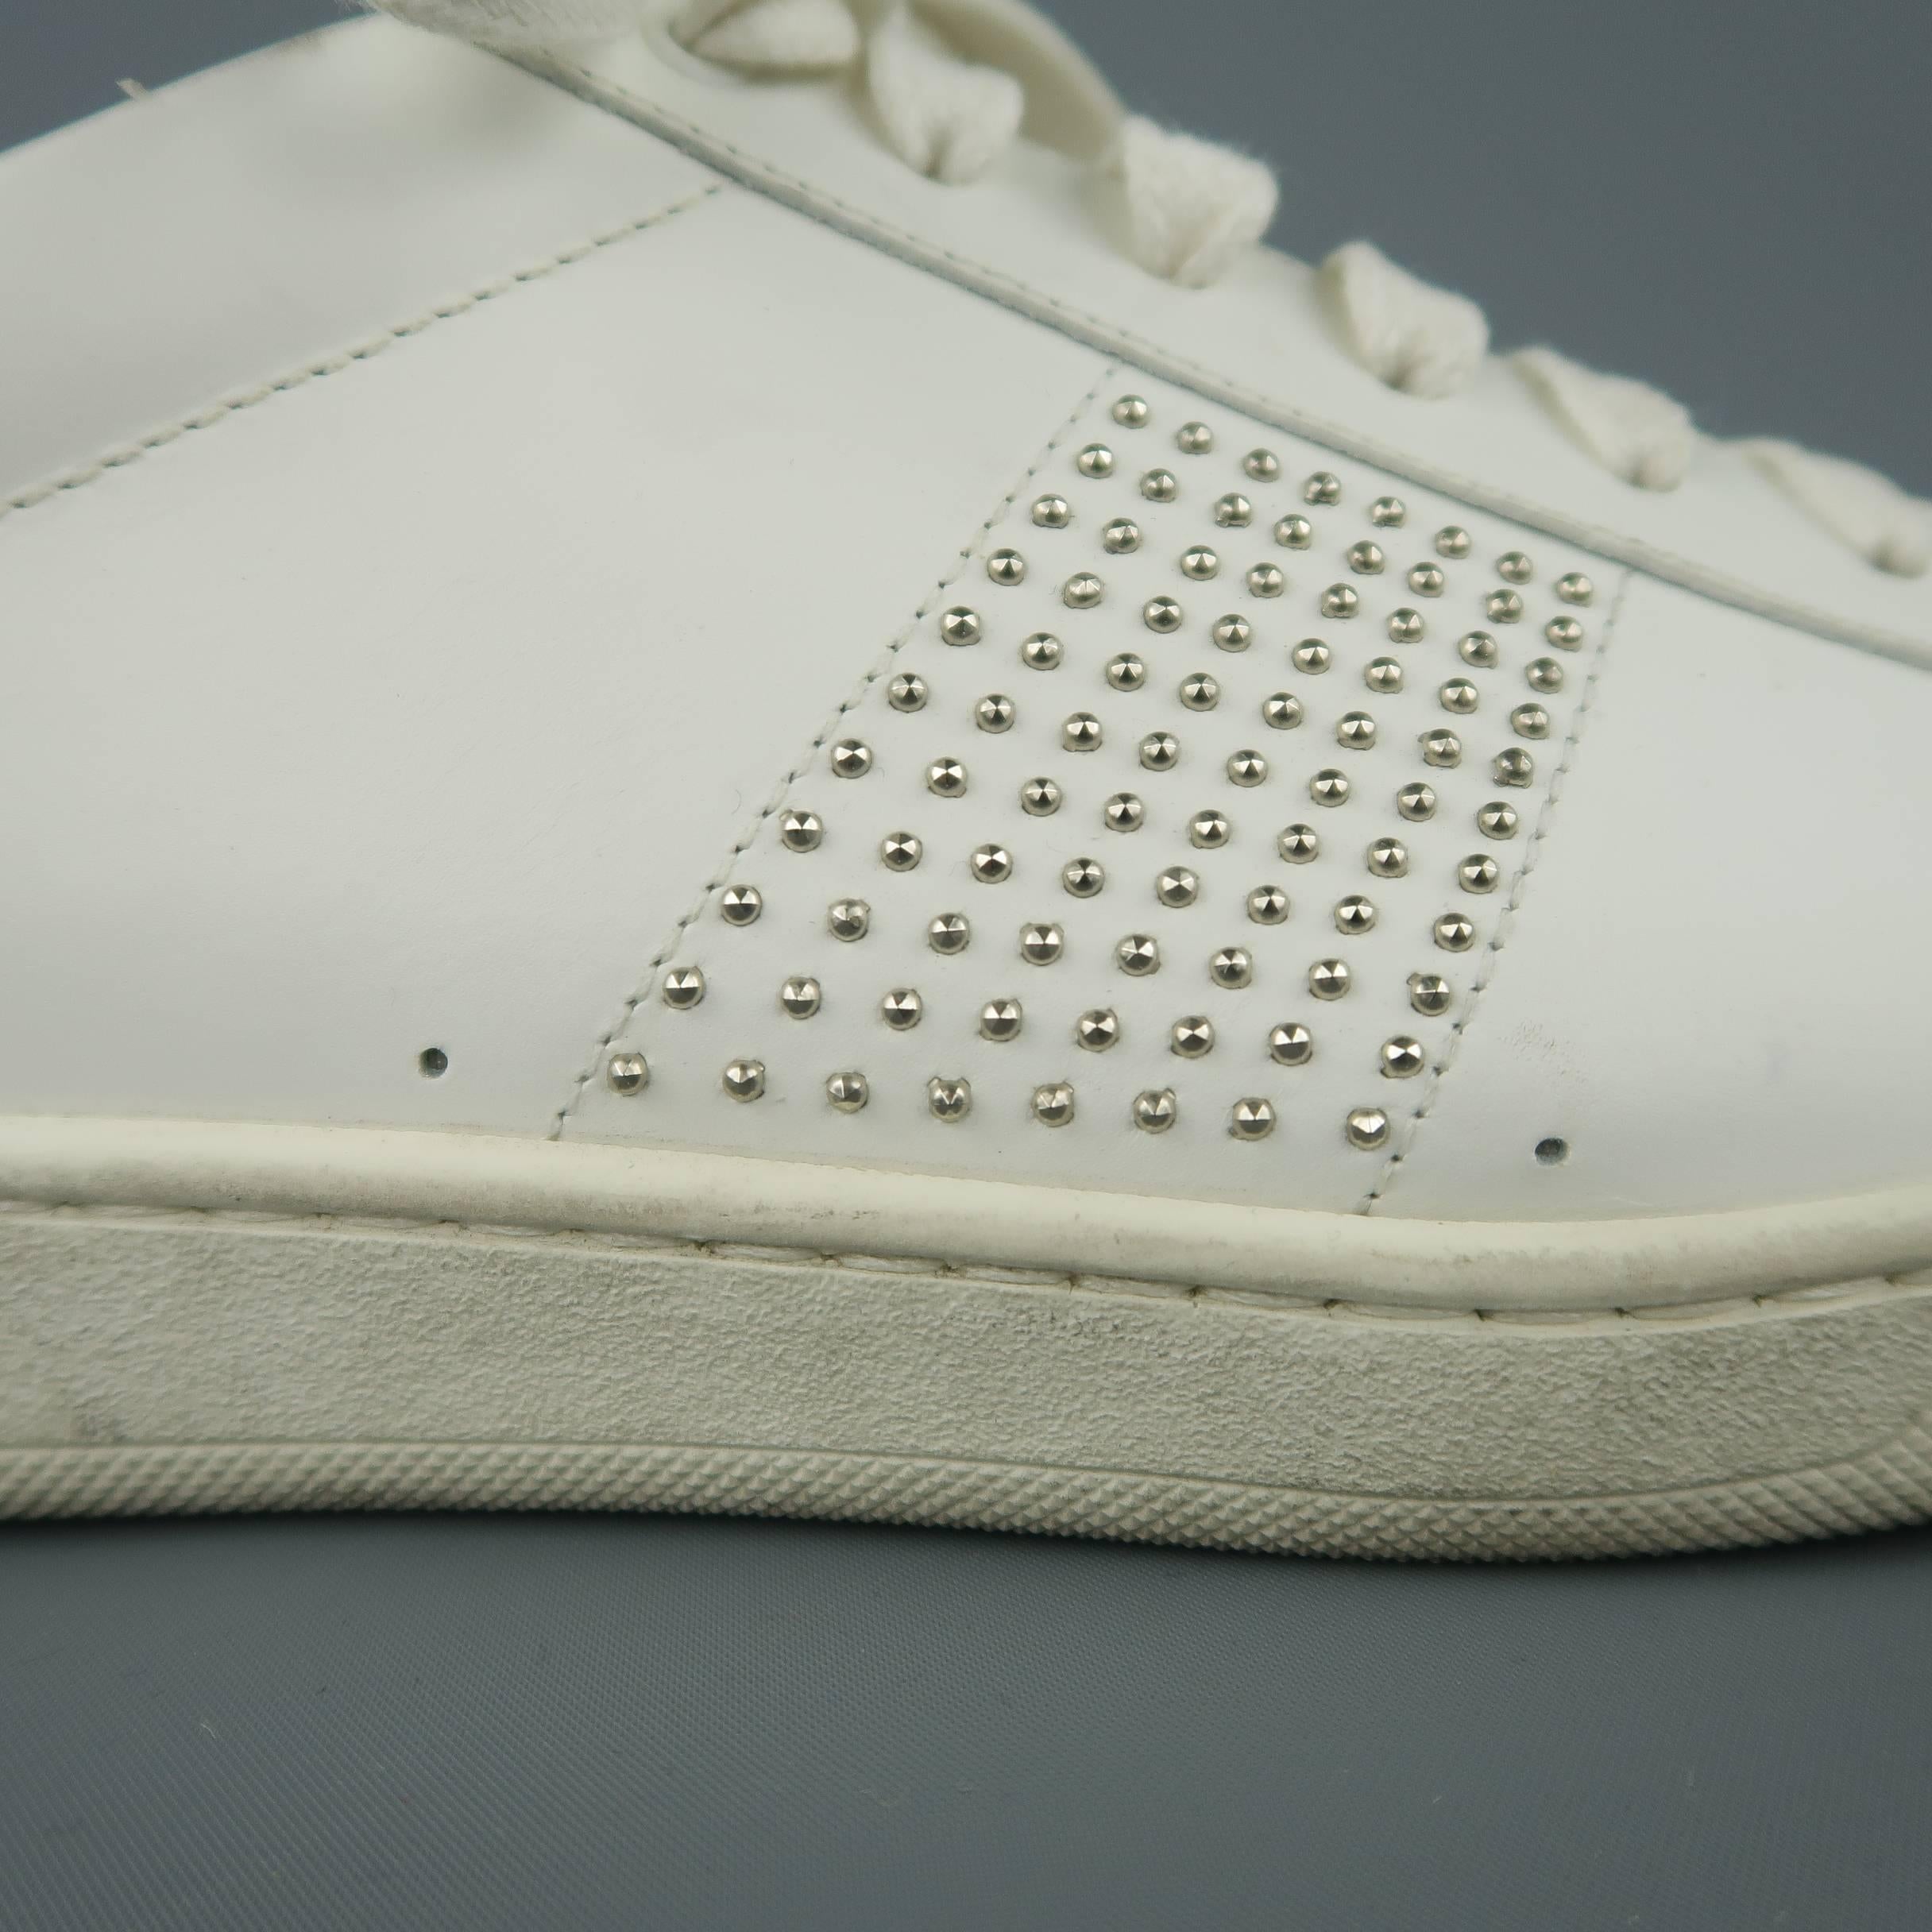 SAINT LAURENT SL/01 low top sneakers come in white leather with a studded side panel and embossed back. Wear throughout. As-is. Made in Italy.
 
Fair Pre-Owned Condition.
Marked: IT 43
 
Outsole: 11.5 x 4 in.
